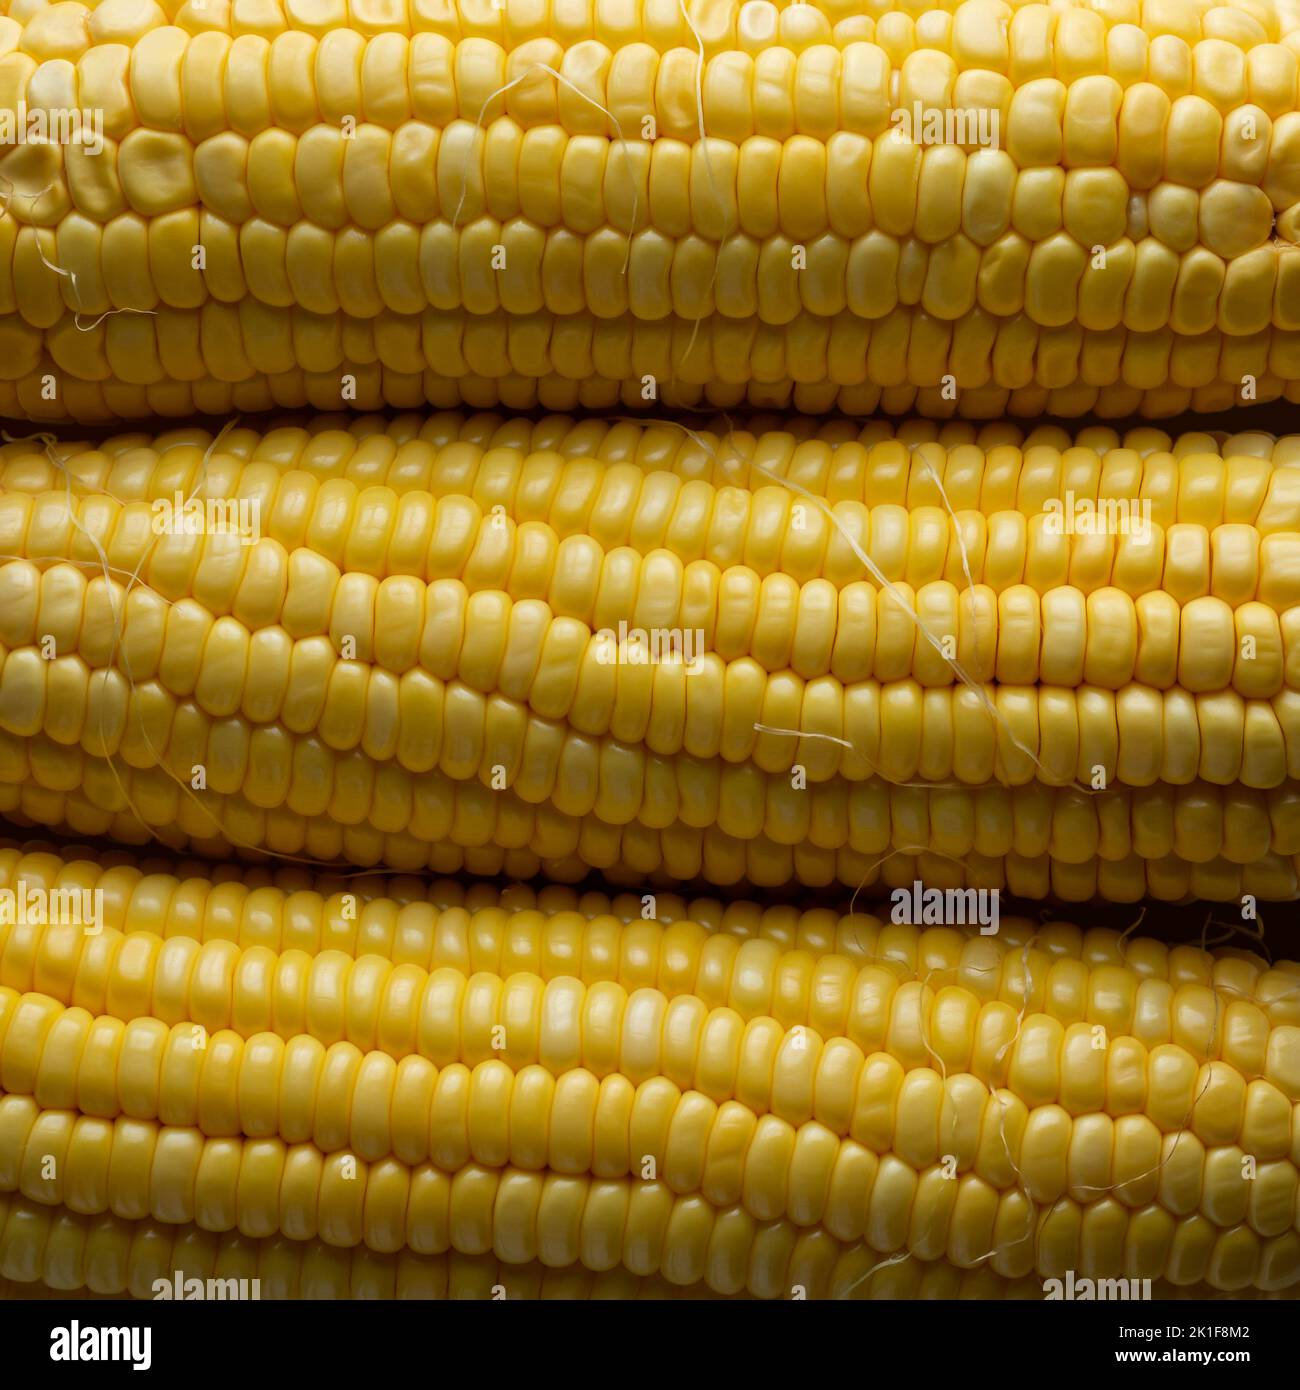 close-up abstract of corn or maize, popular starchy vegetable full frame background Stock Photo